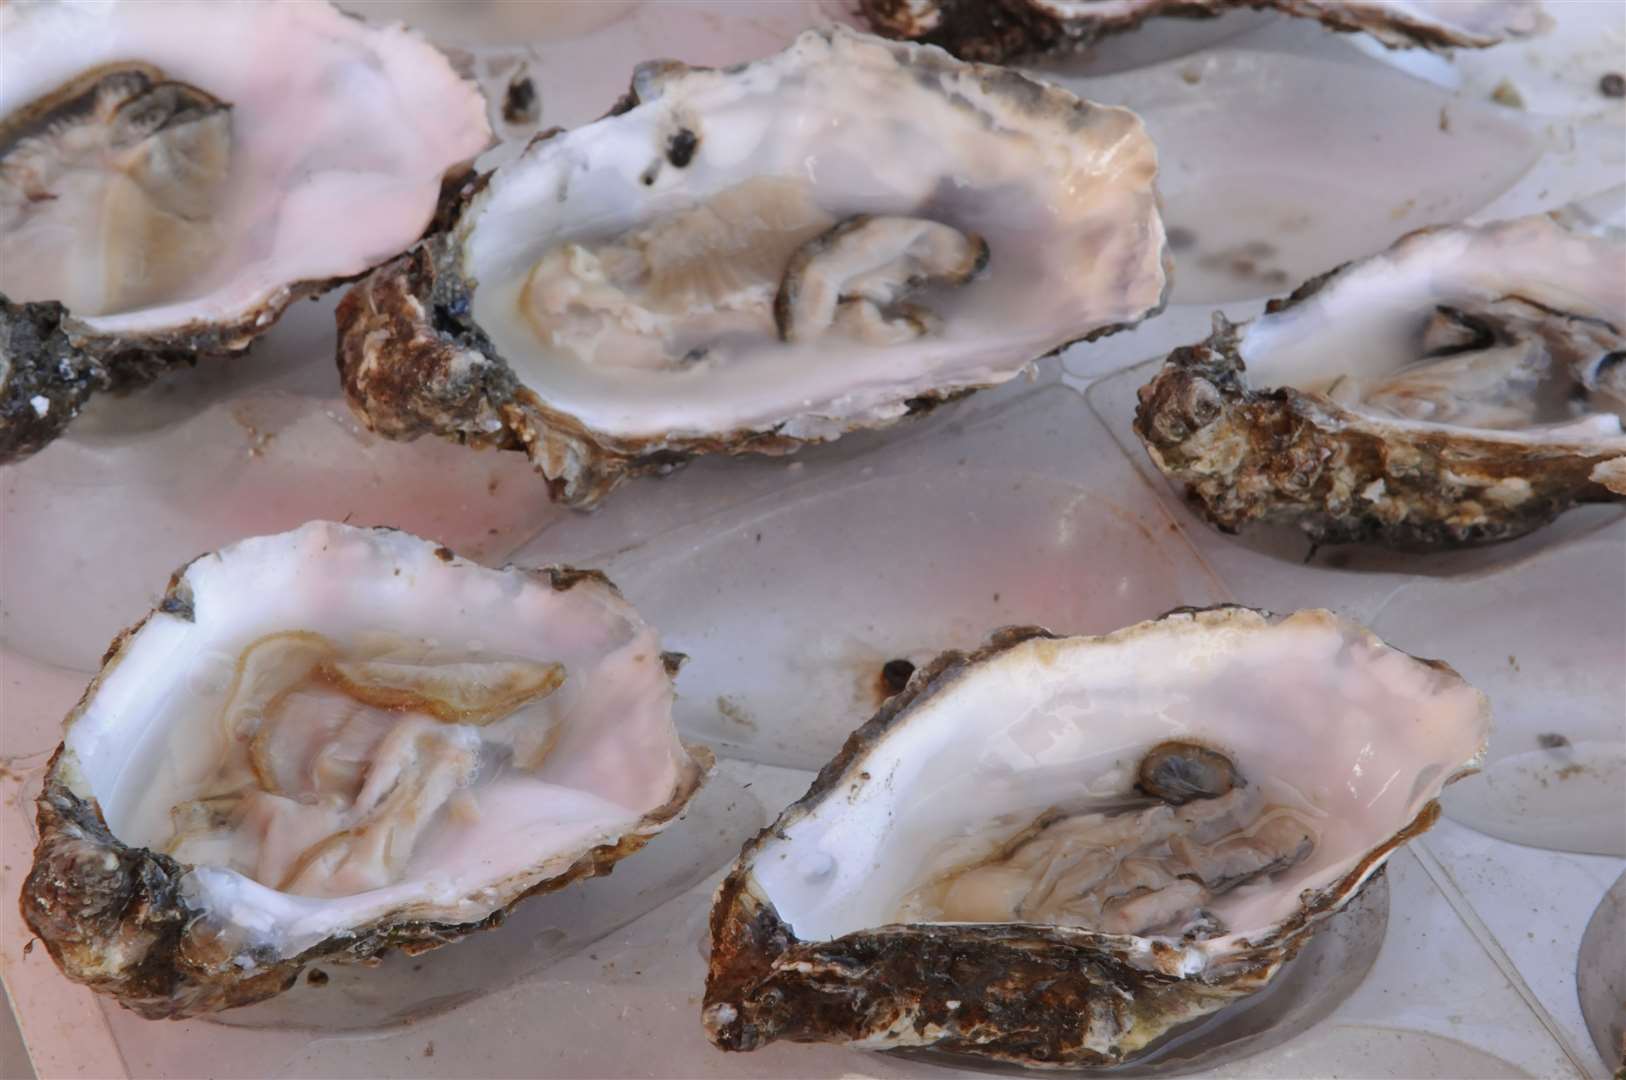 Whitstable's oysters could get special protection in the Japanese market